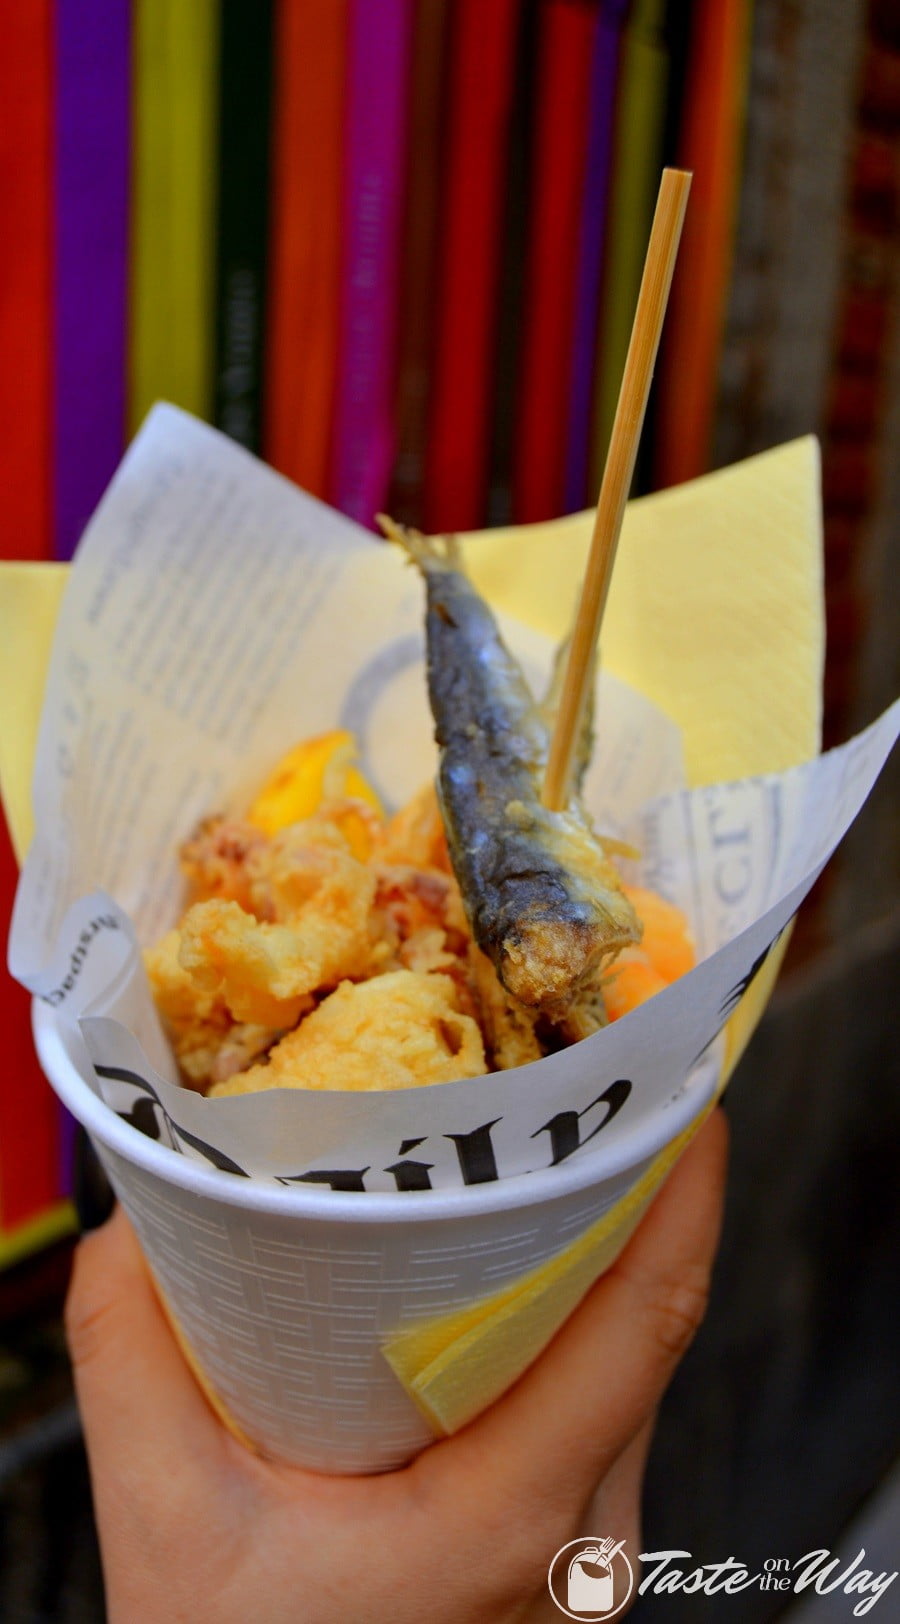 One of the top 10 fun #ThingsToDo in #Venice, #Italy is to taste the street food. Check out for more! #travel #photography @tasteontheway